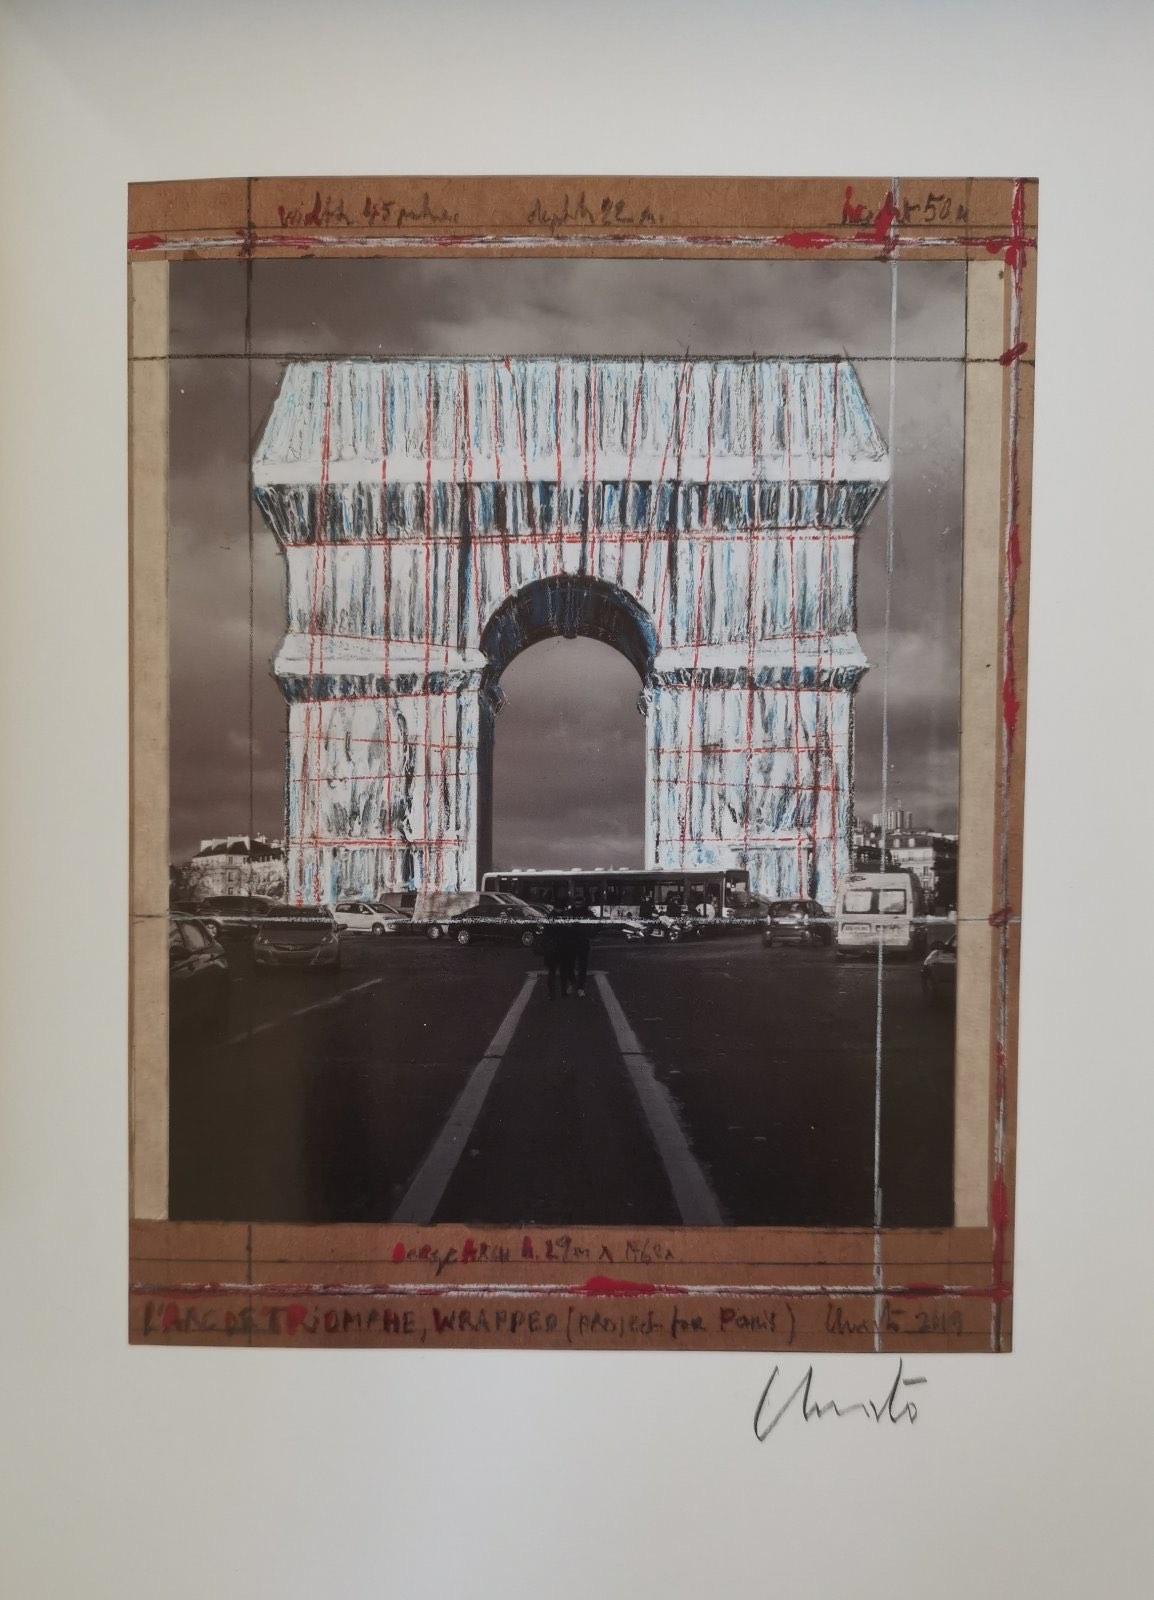 christo signed prints for sale